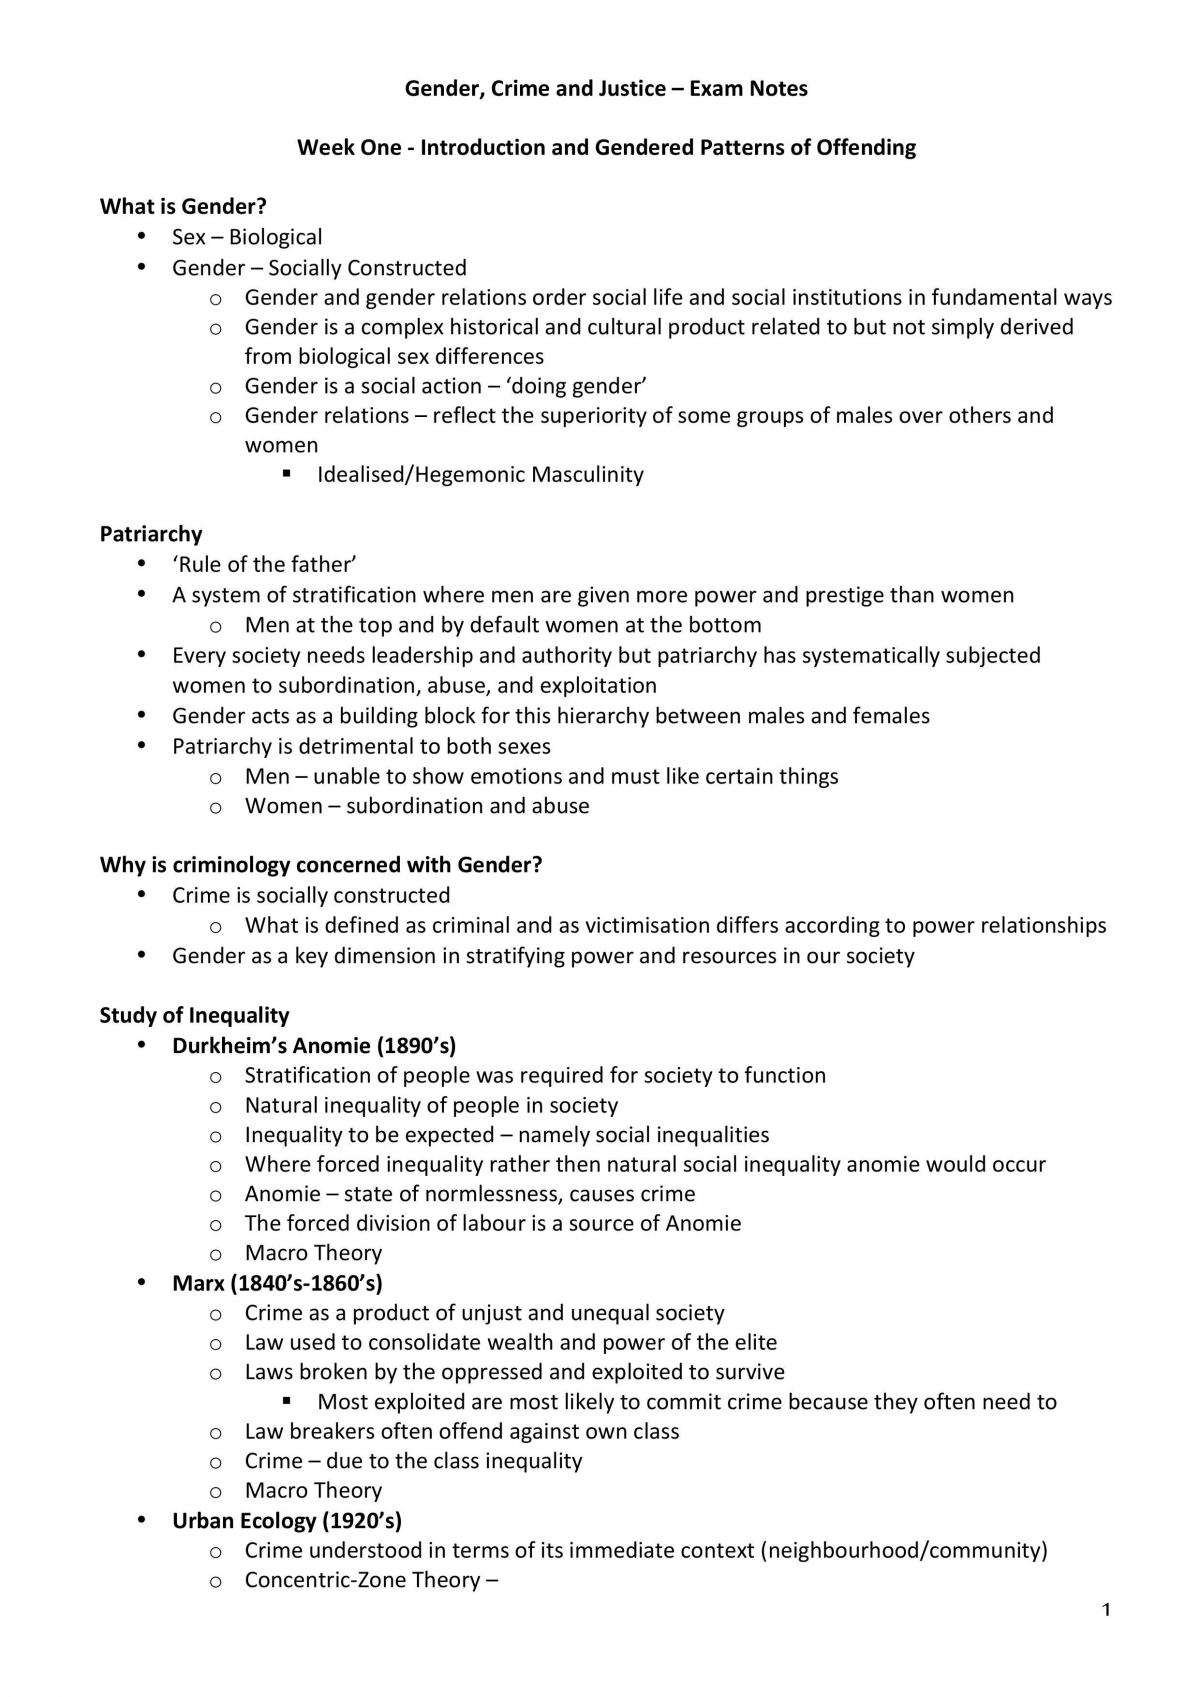 2015CCJ WK 1 - 12 Full Study Notes  - Page 1